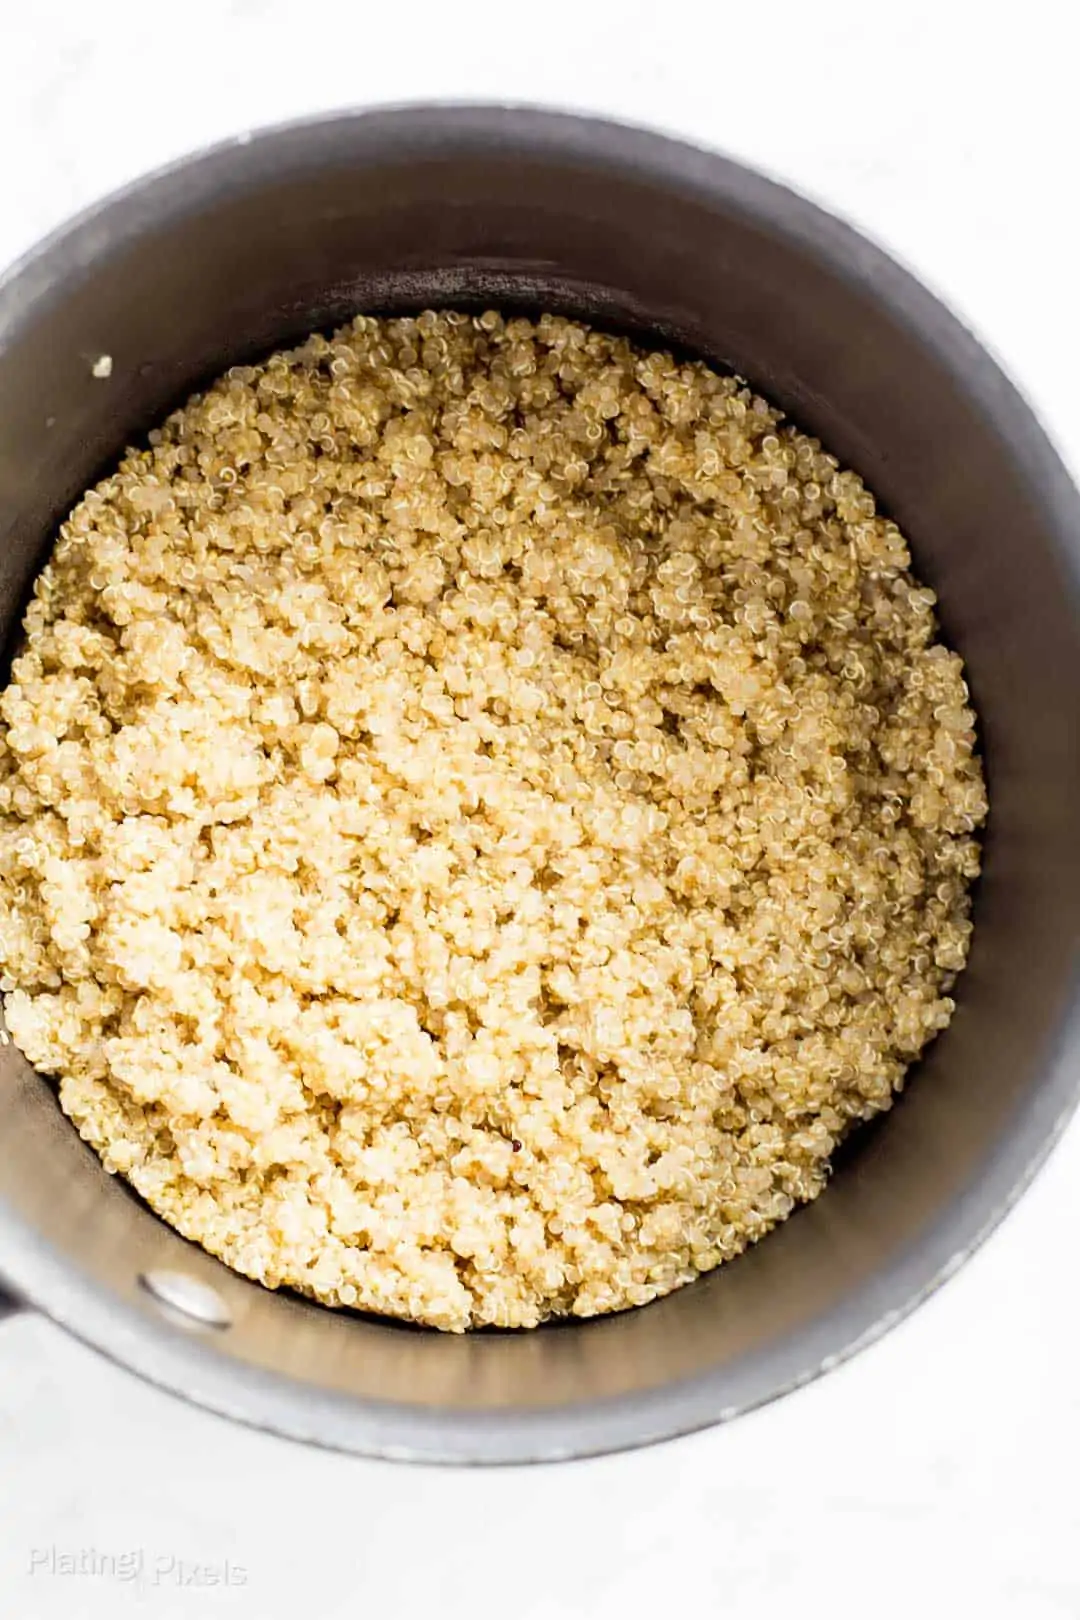 Process shot of cooking quinoa in a pan